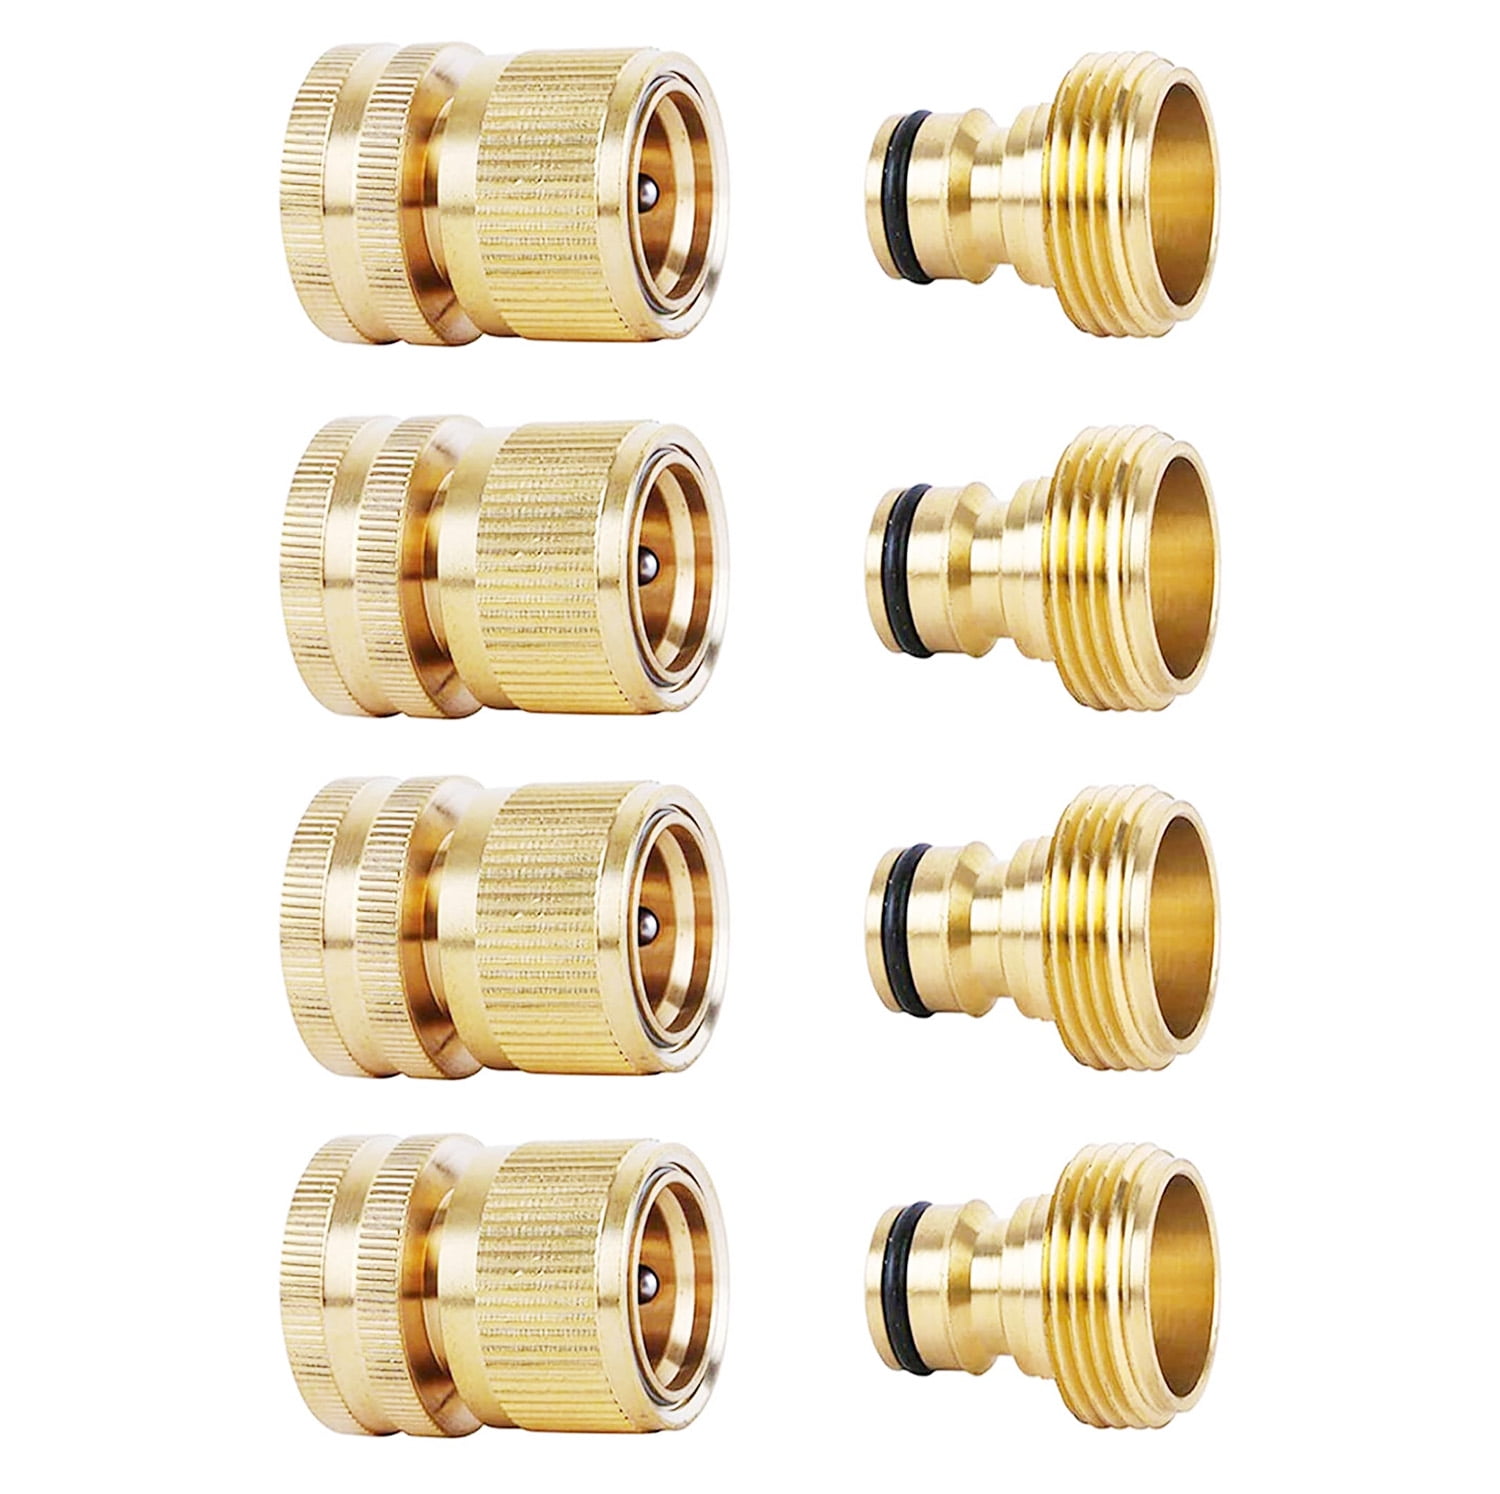 58118N Orbit Brass Female Garden Hose Quick Connect Fitting for fast disconnect 